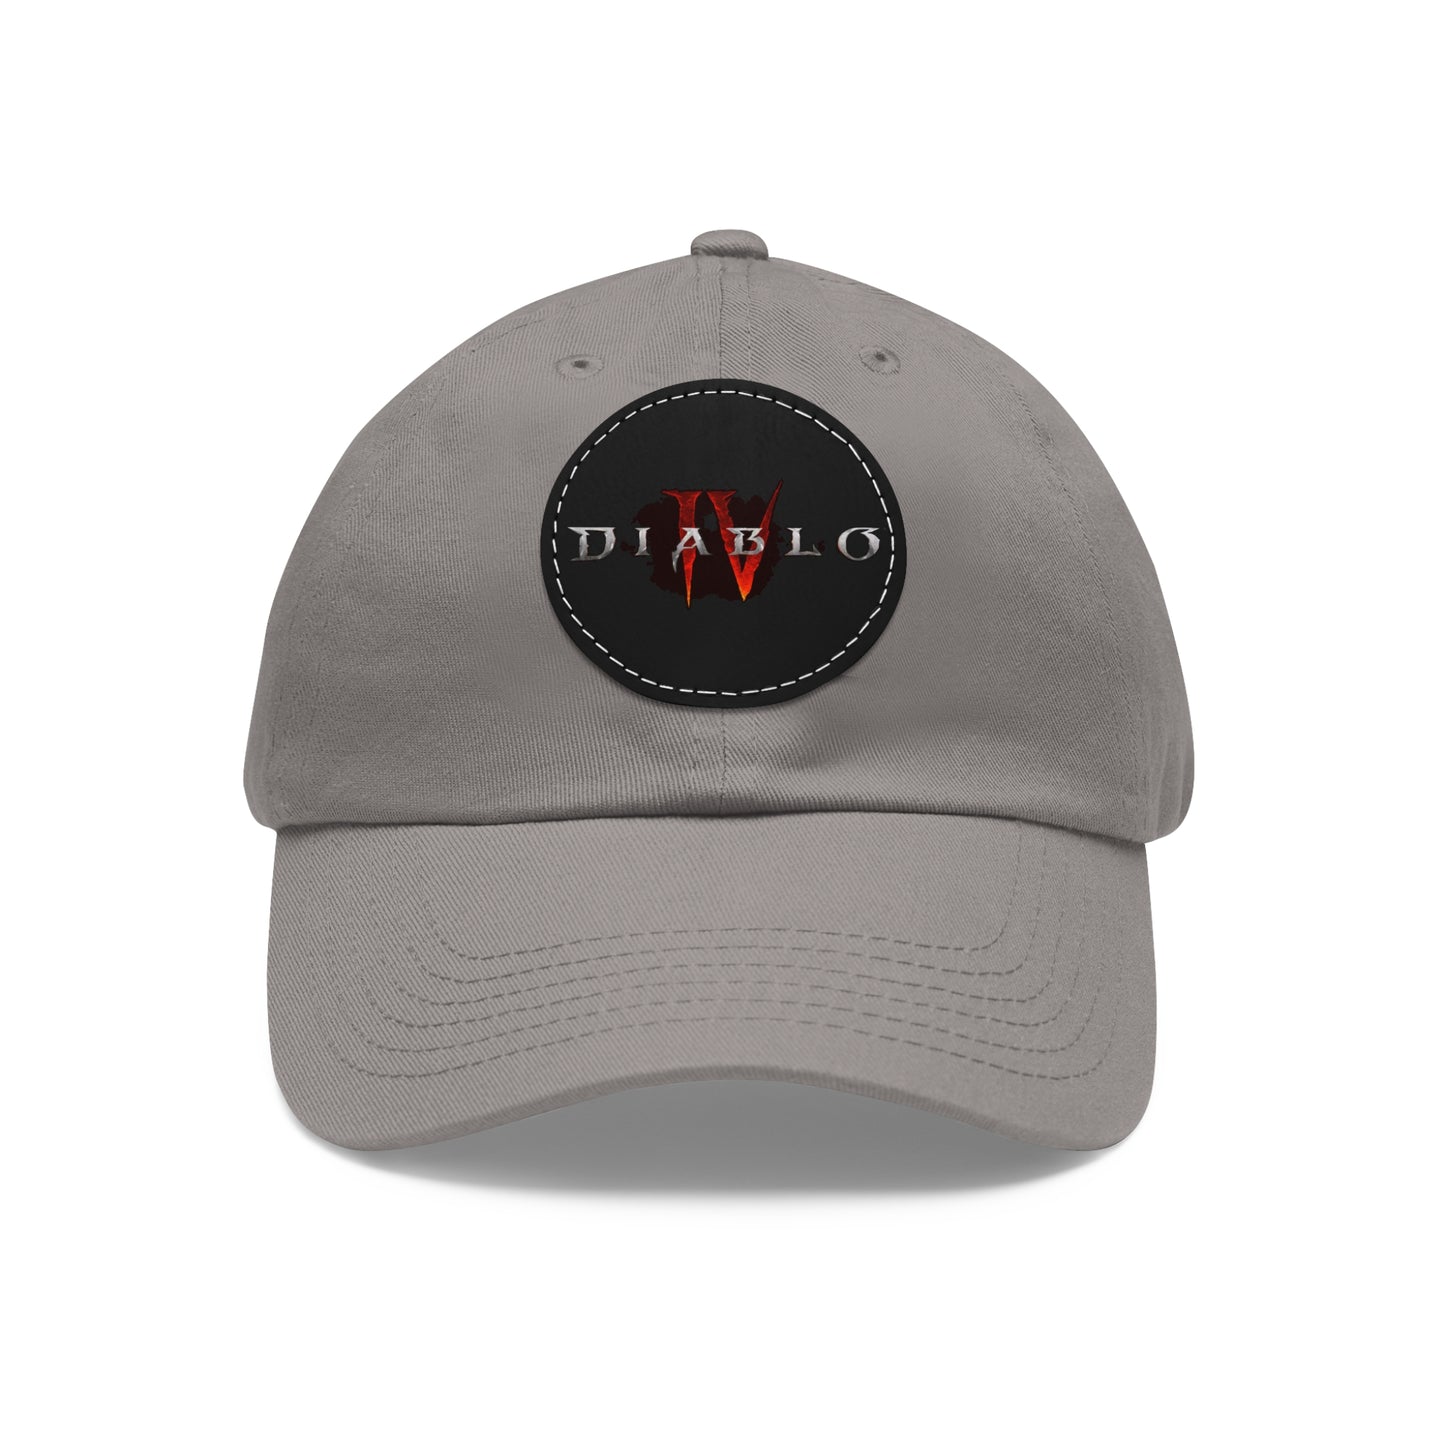 Diablo IV Dad Hat with Leather Patch (Round)